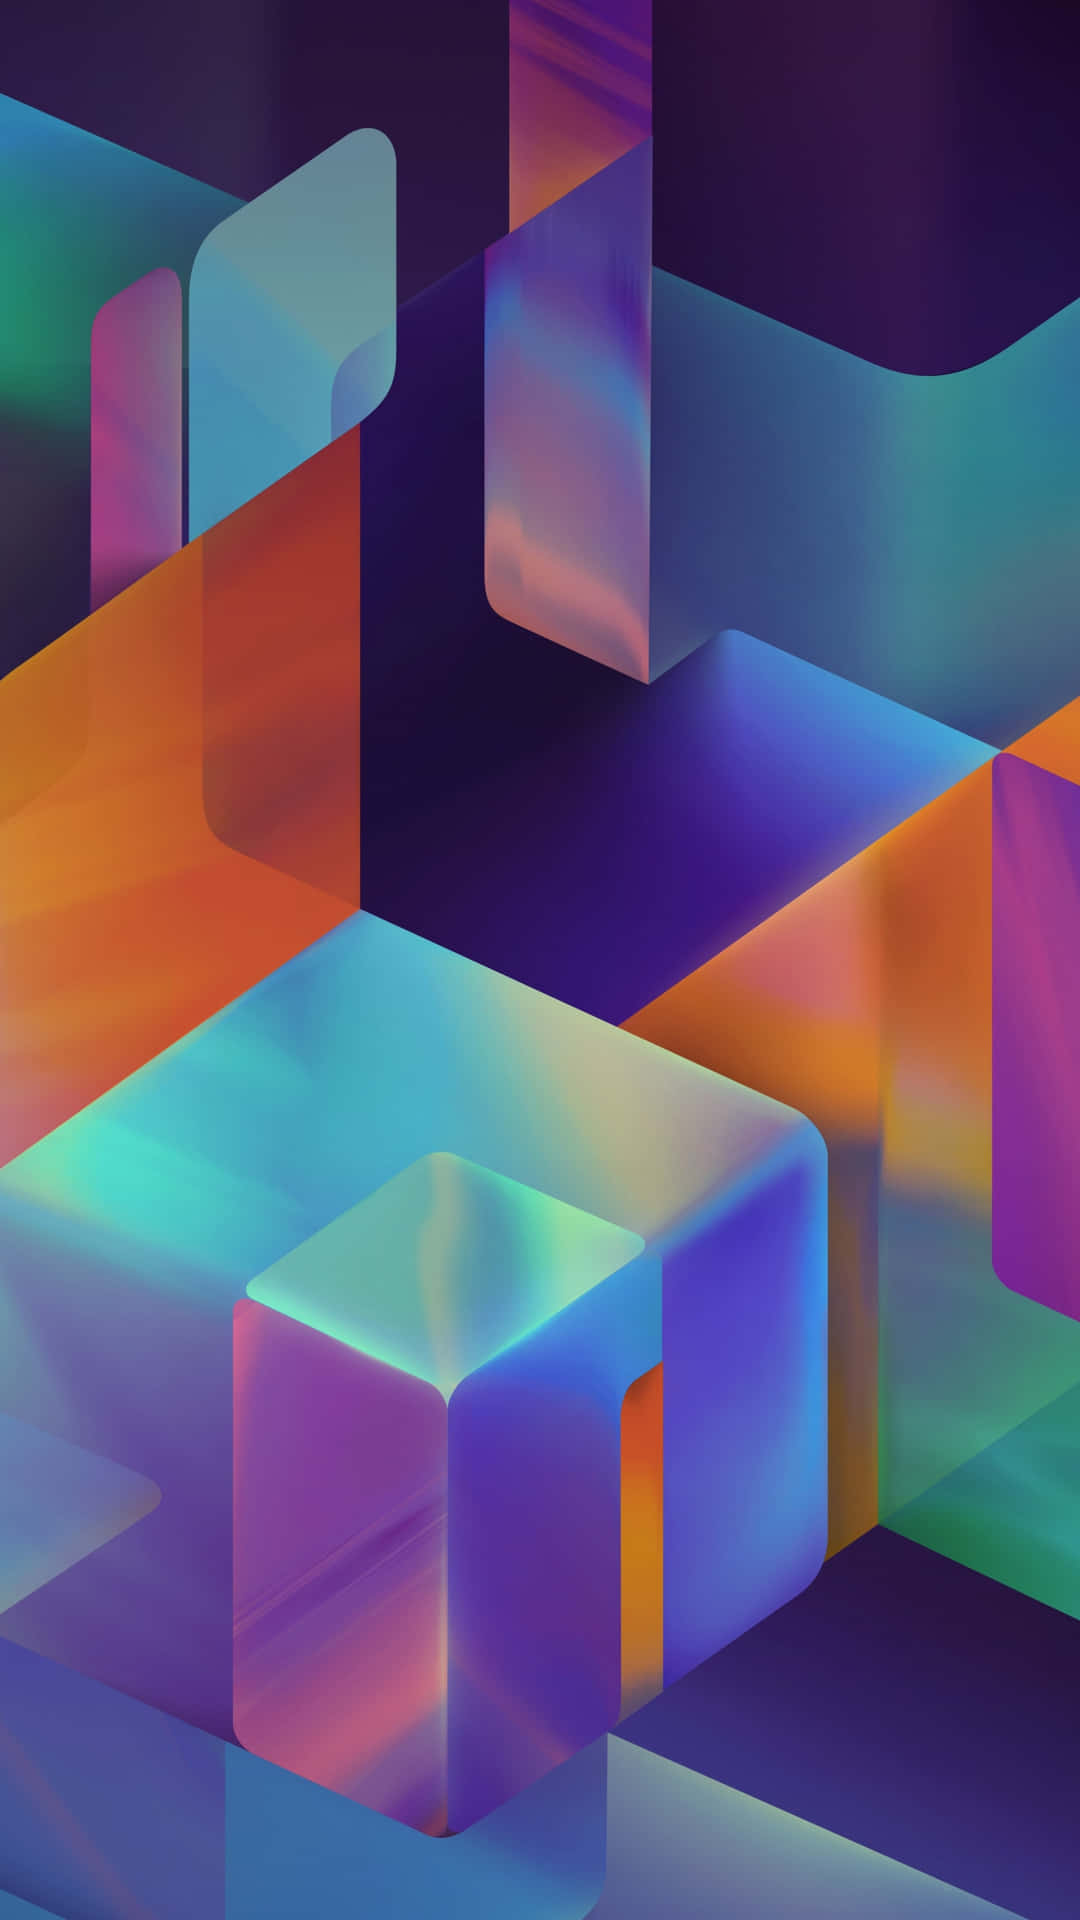 Abstract Colorful Geometric Shapes Wallpaper Wallpaper